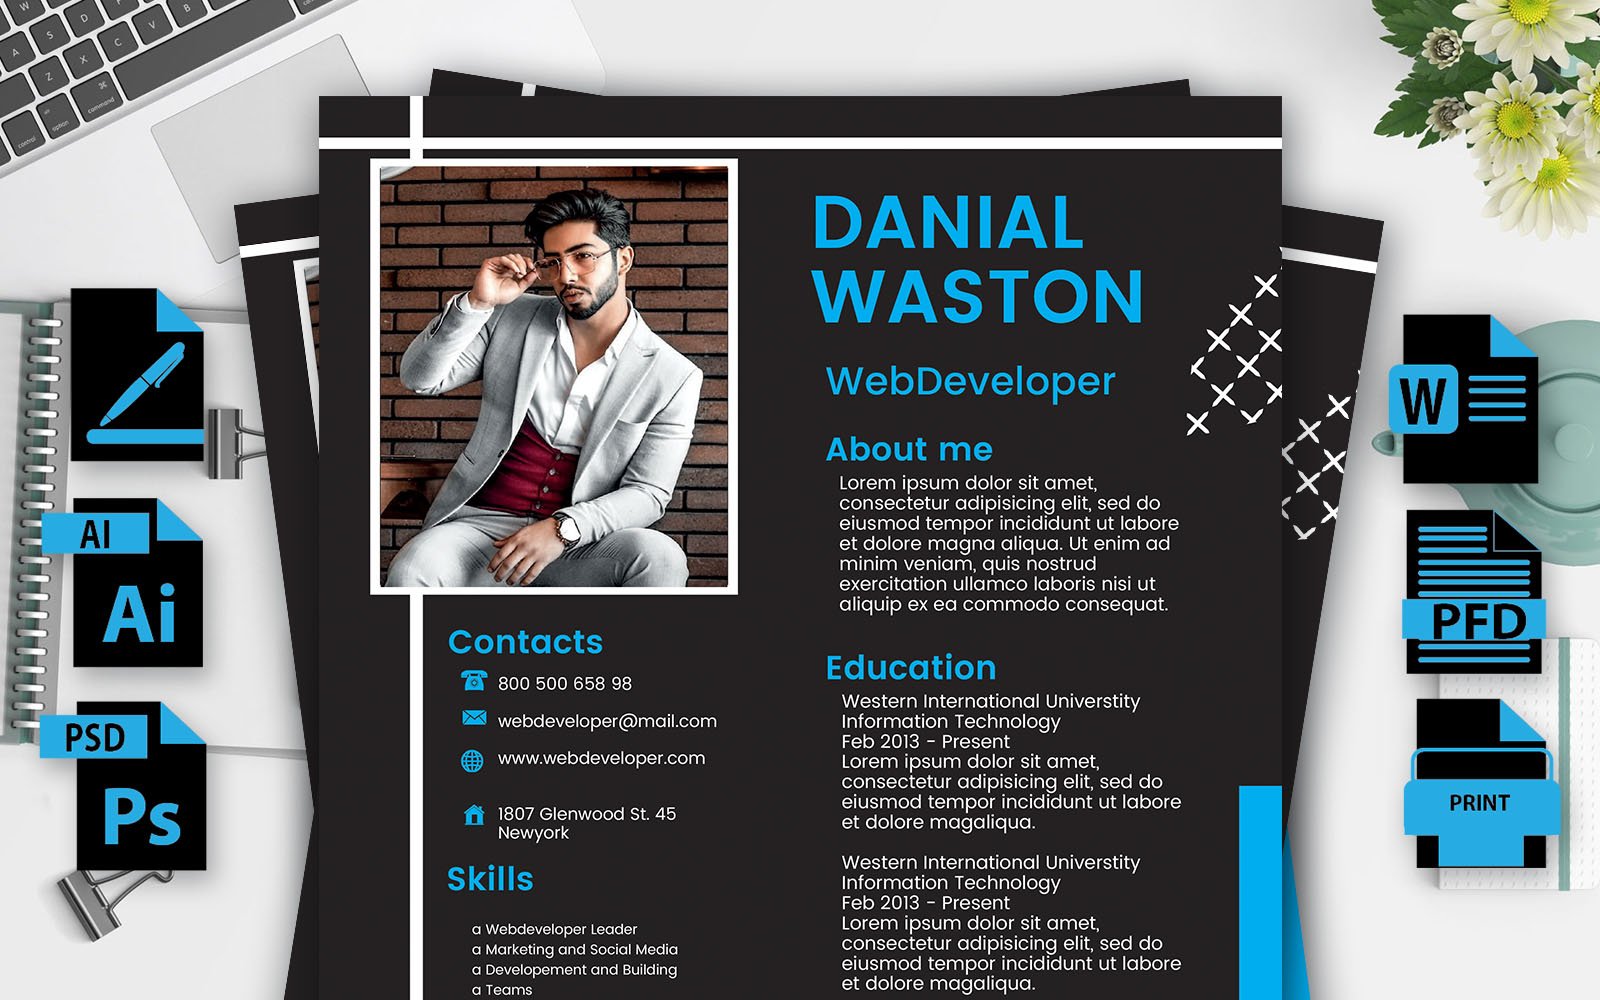 Template #341136 Resume With Webdesign Template - Logo template Preview